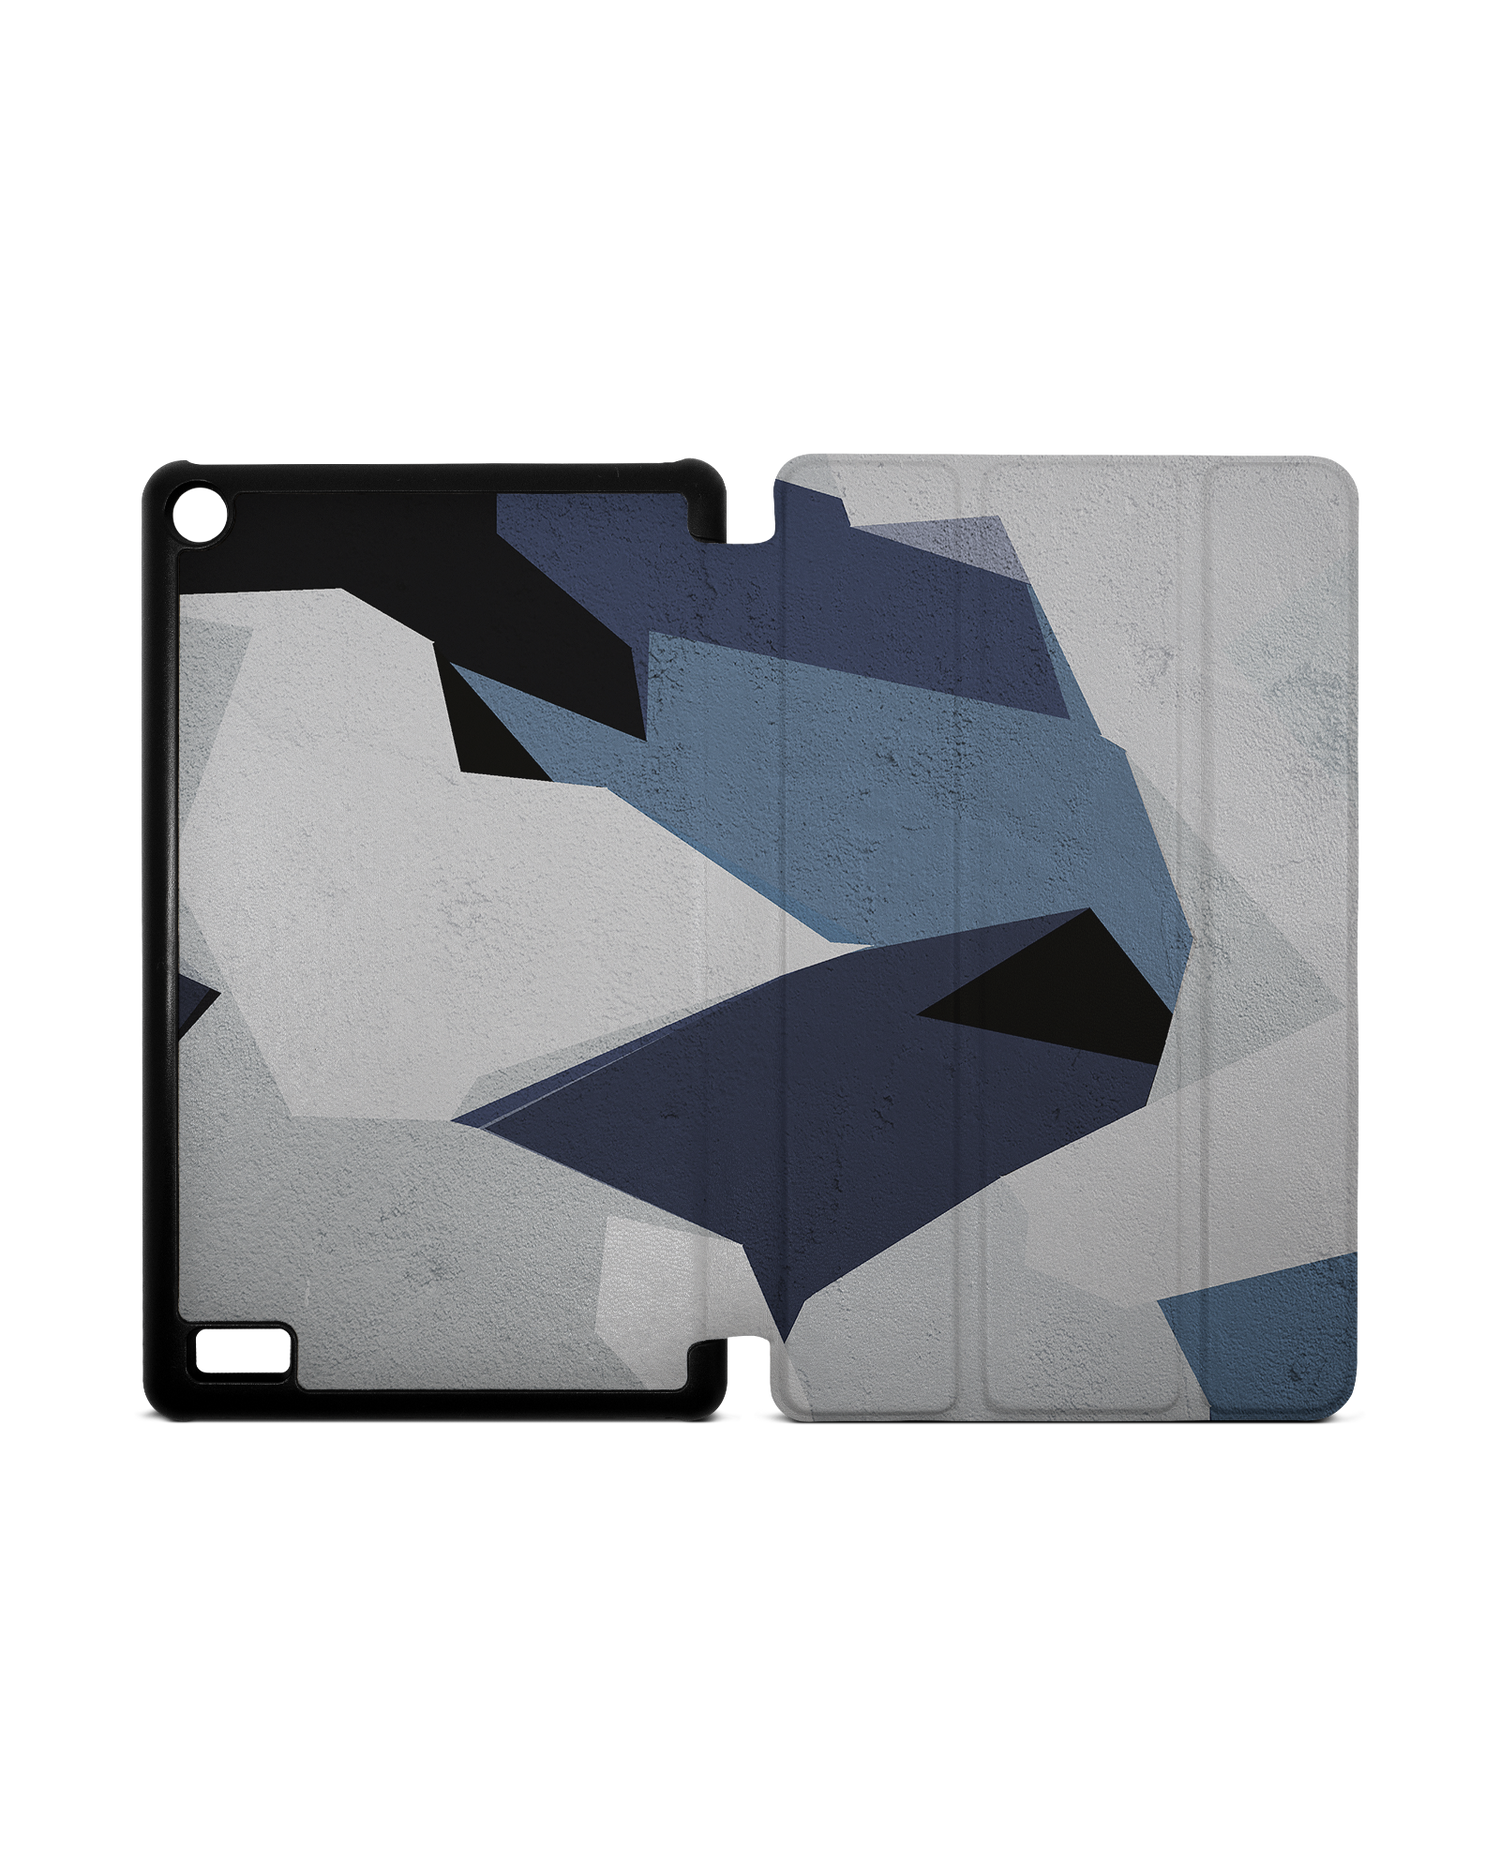 Geometric Camo Blue Tablet Smart Case for Amazon Fire 7: Opened